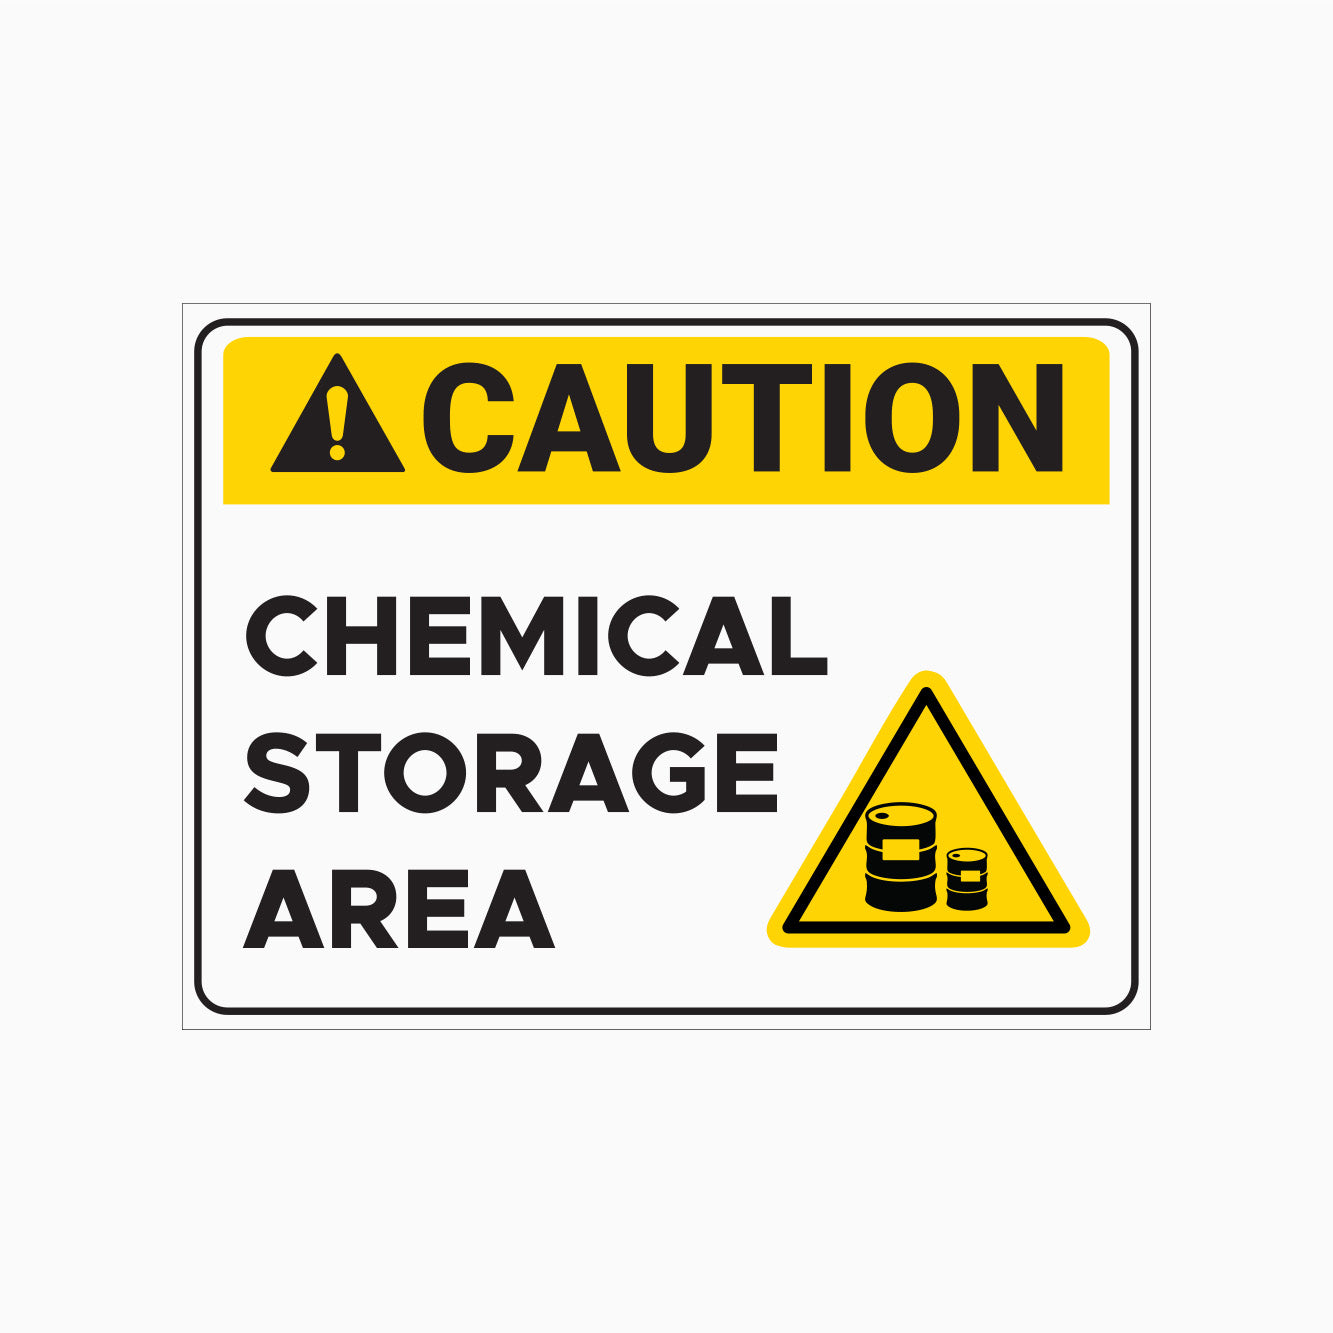 CHEMICAL STORAGE AREA SIGN - CAUTION SIGN